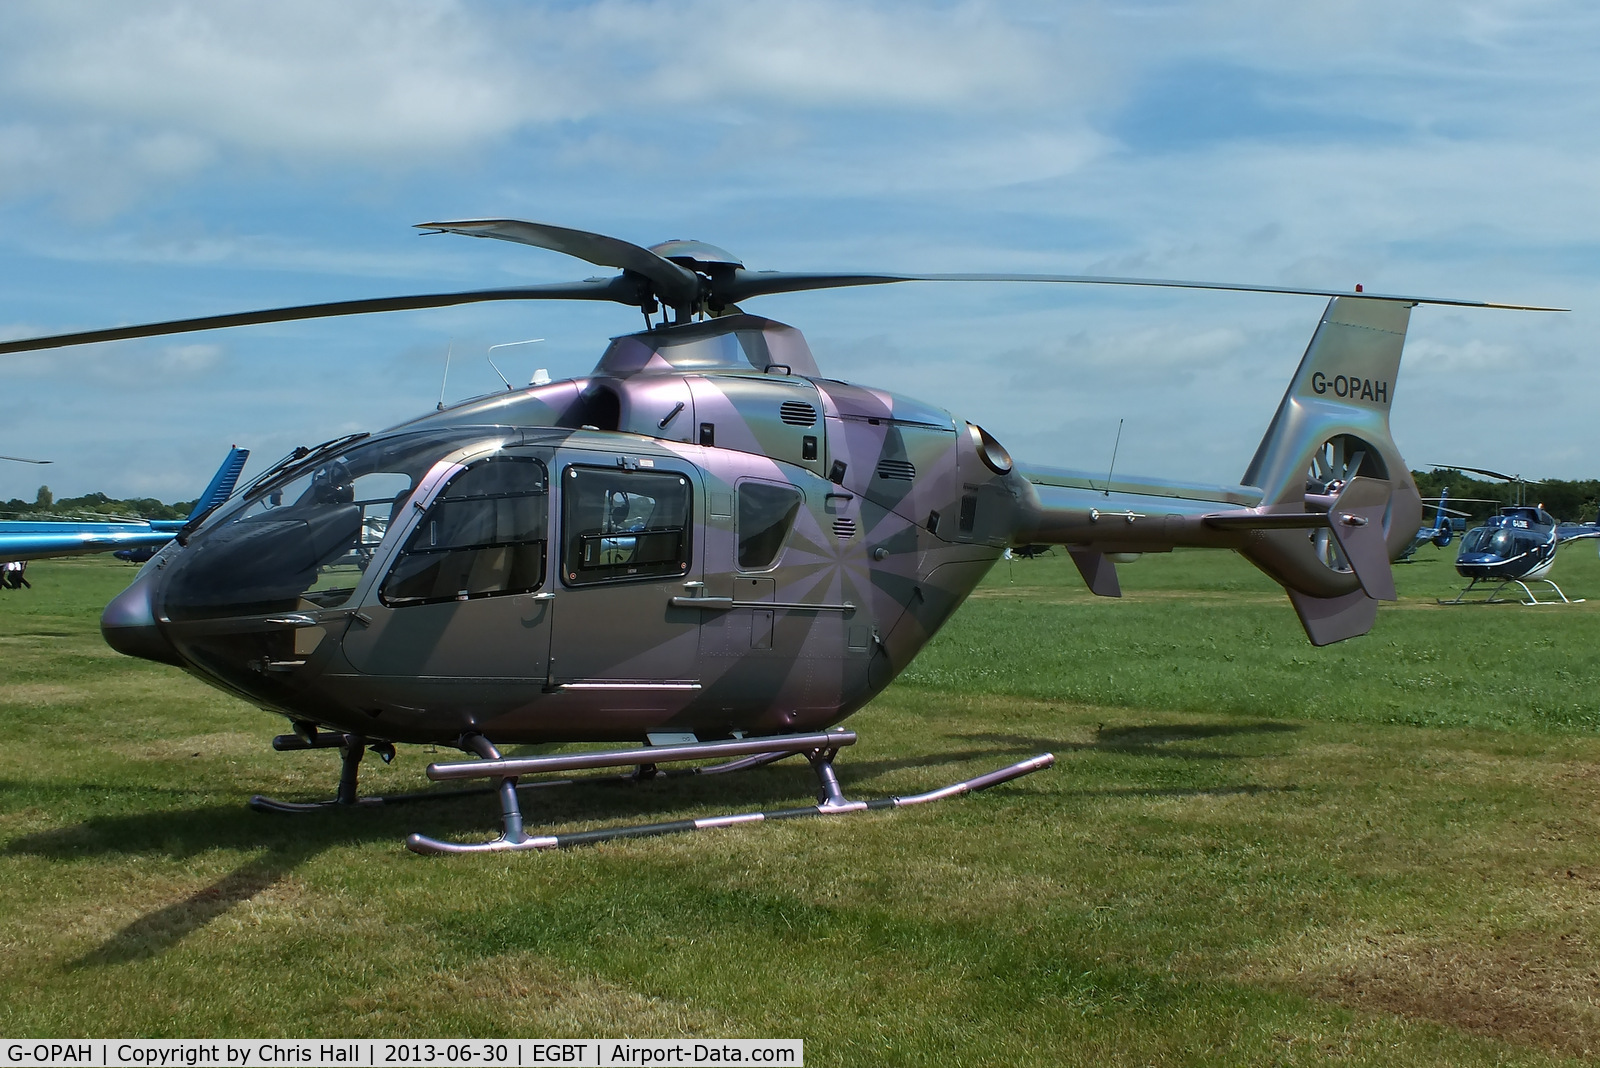 G-OPAH, 2007 Eurocopter EC-135T-2+ C/N 0635, being used for ferrying race fans to the British F1 Grand Prix at Silverstone